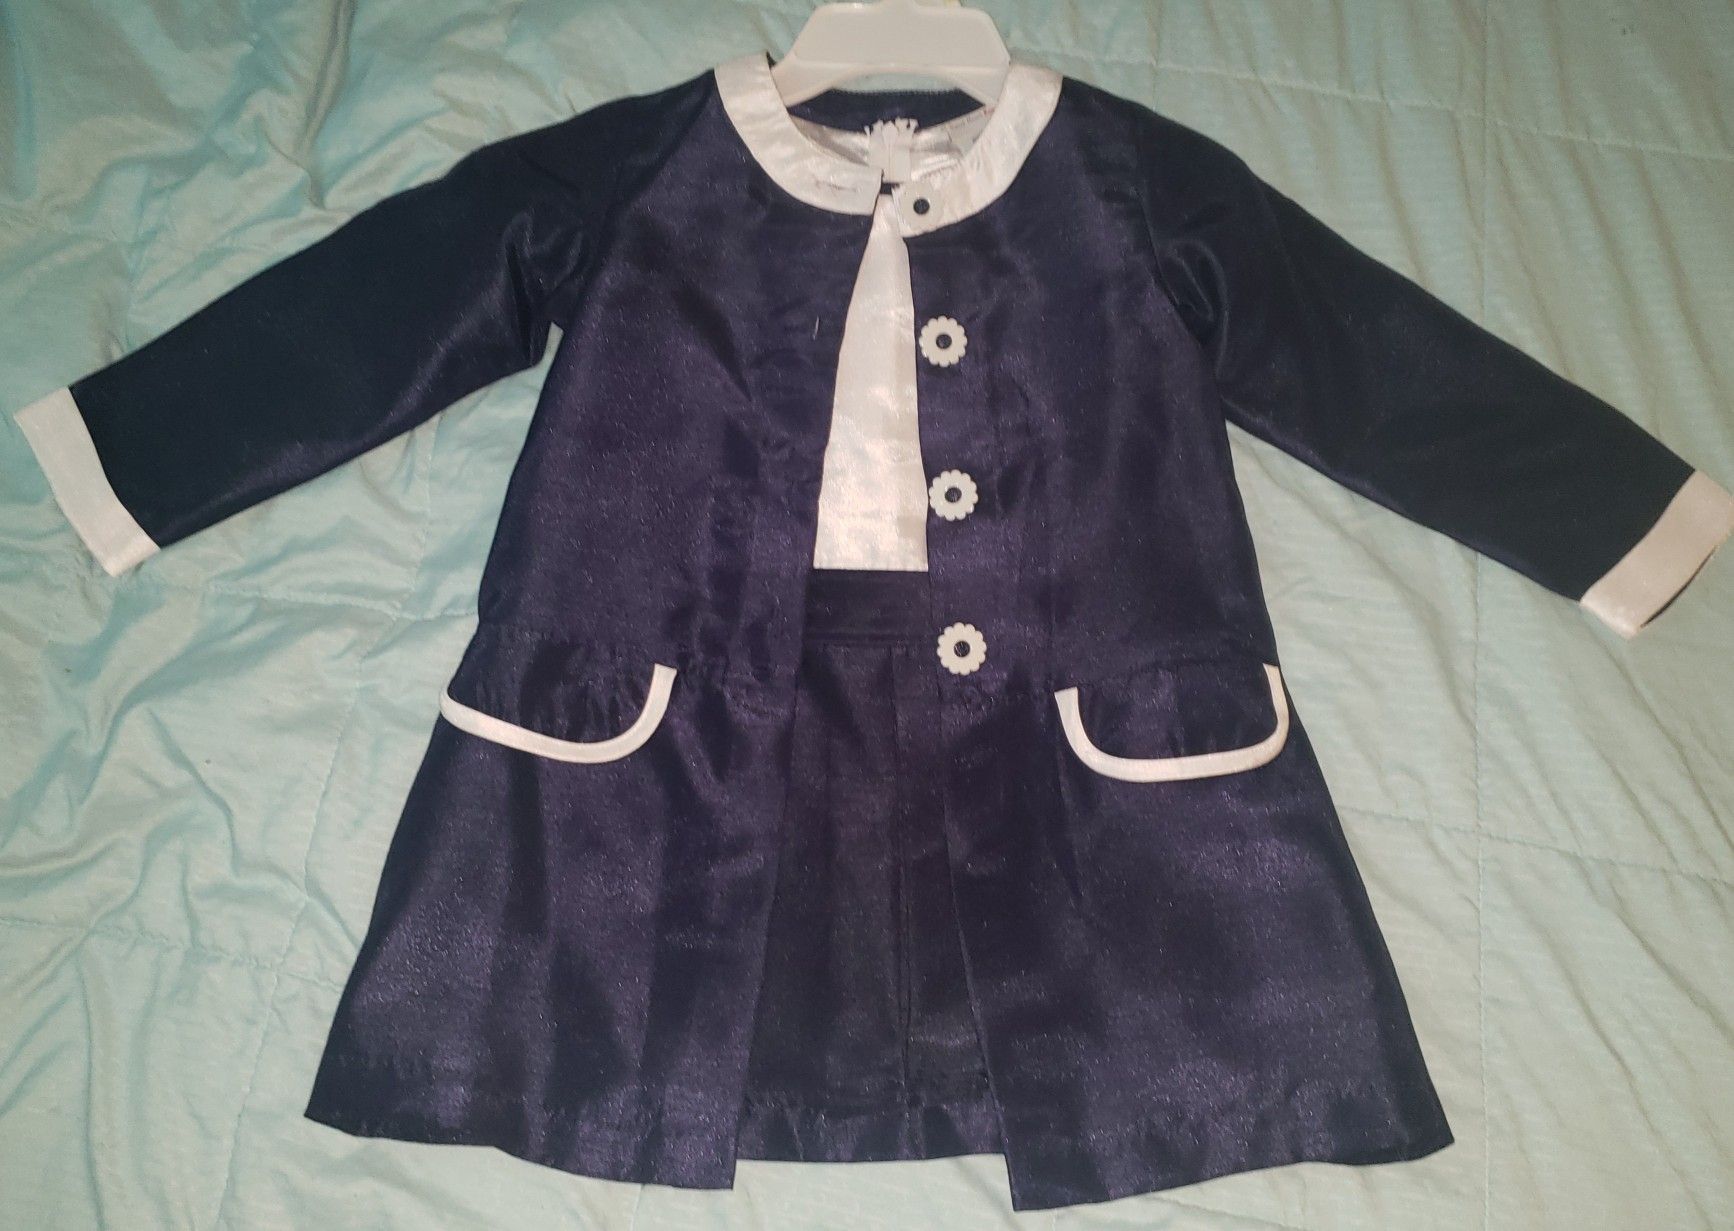 NEW SWEET HEART ROSE Girls Dress & Coat Set Outfit Party sz 4 Navy Blue White